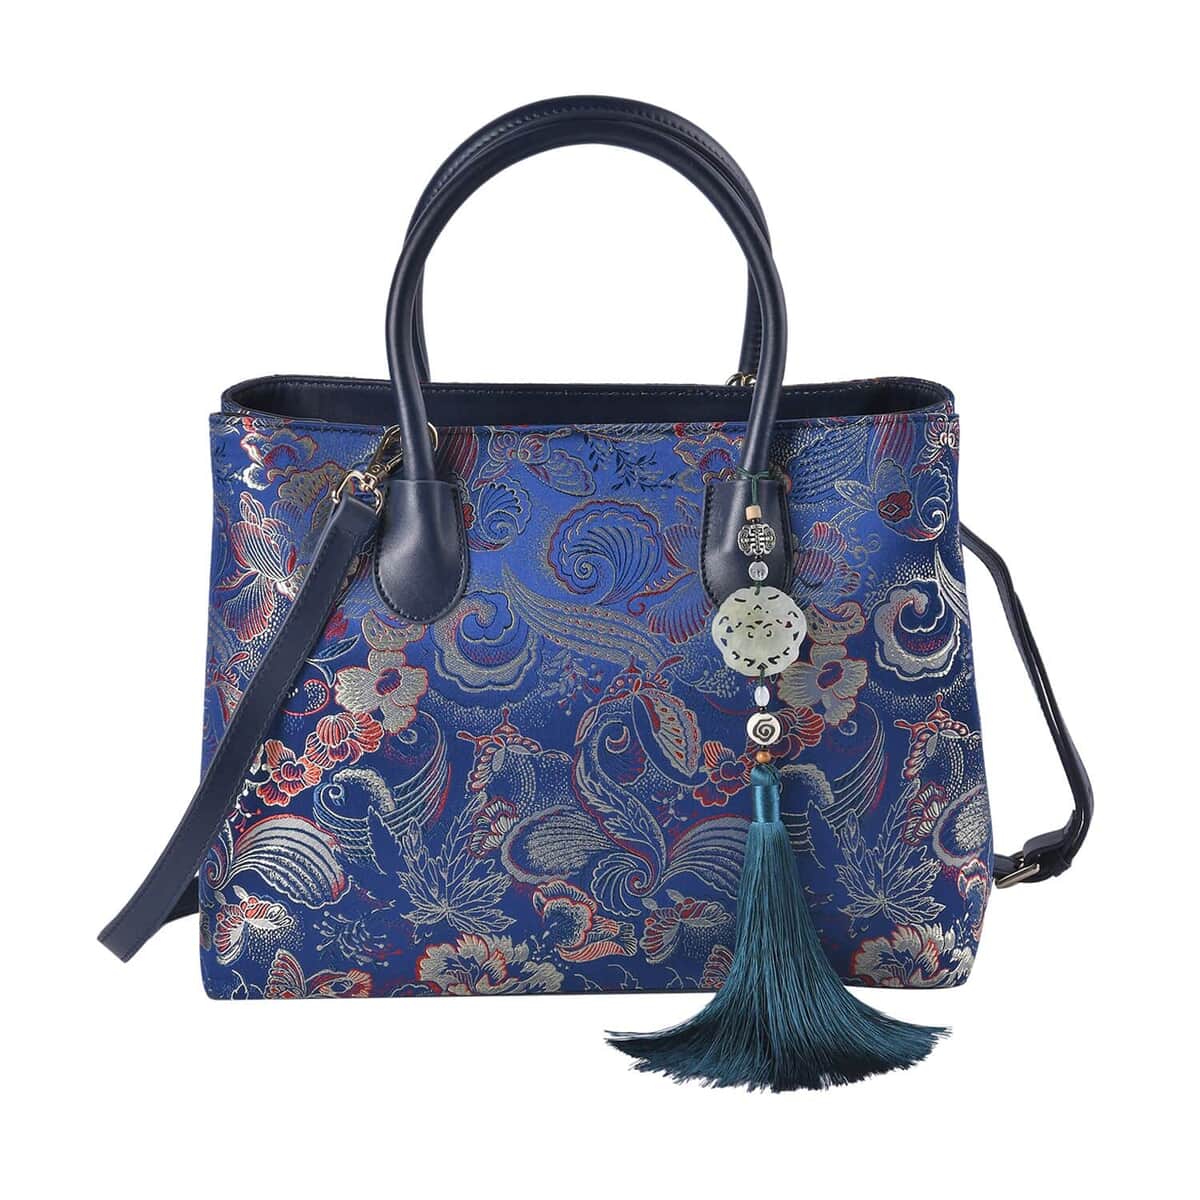 Navy Phoenix tail Flower Pattern Brocade with Genuine Leather Crossbody Bag (12.91"x9.84"x5.51") with Shoulder Strap image number 0